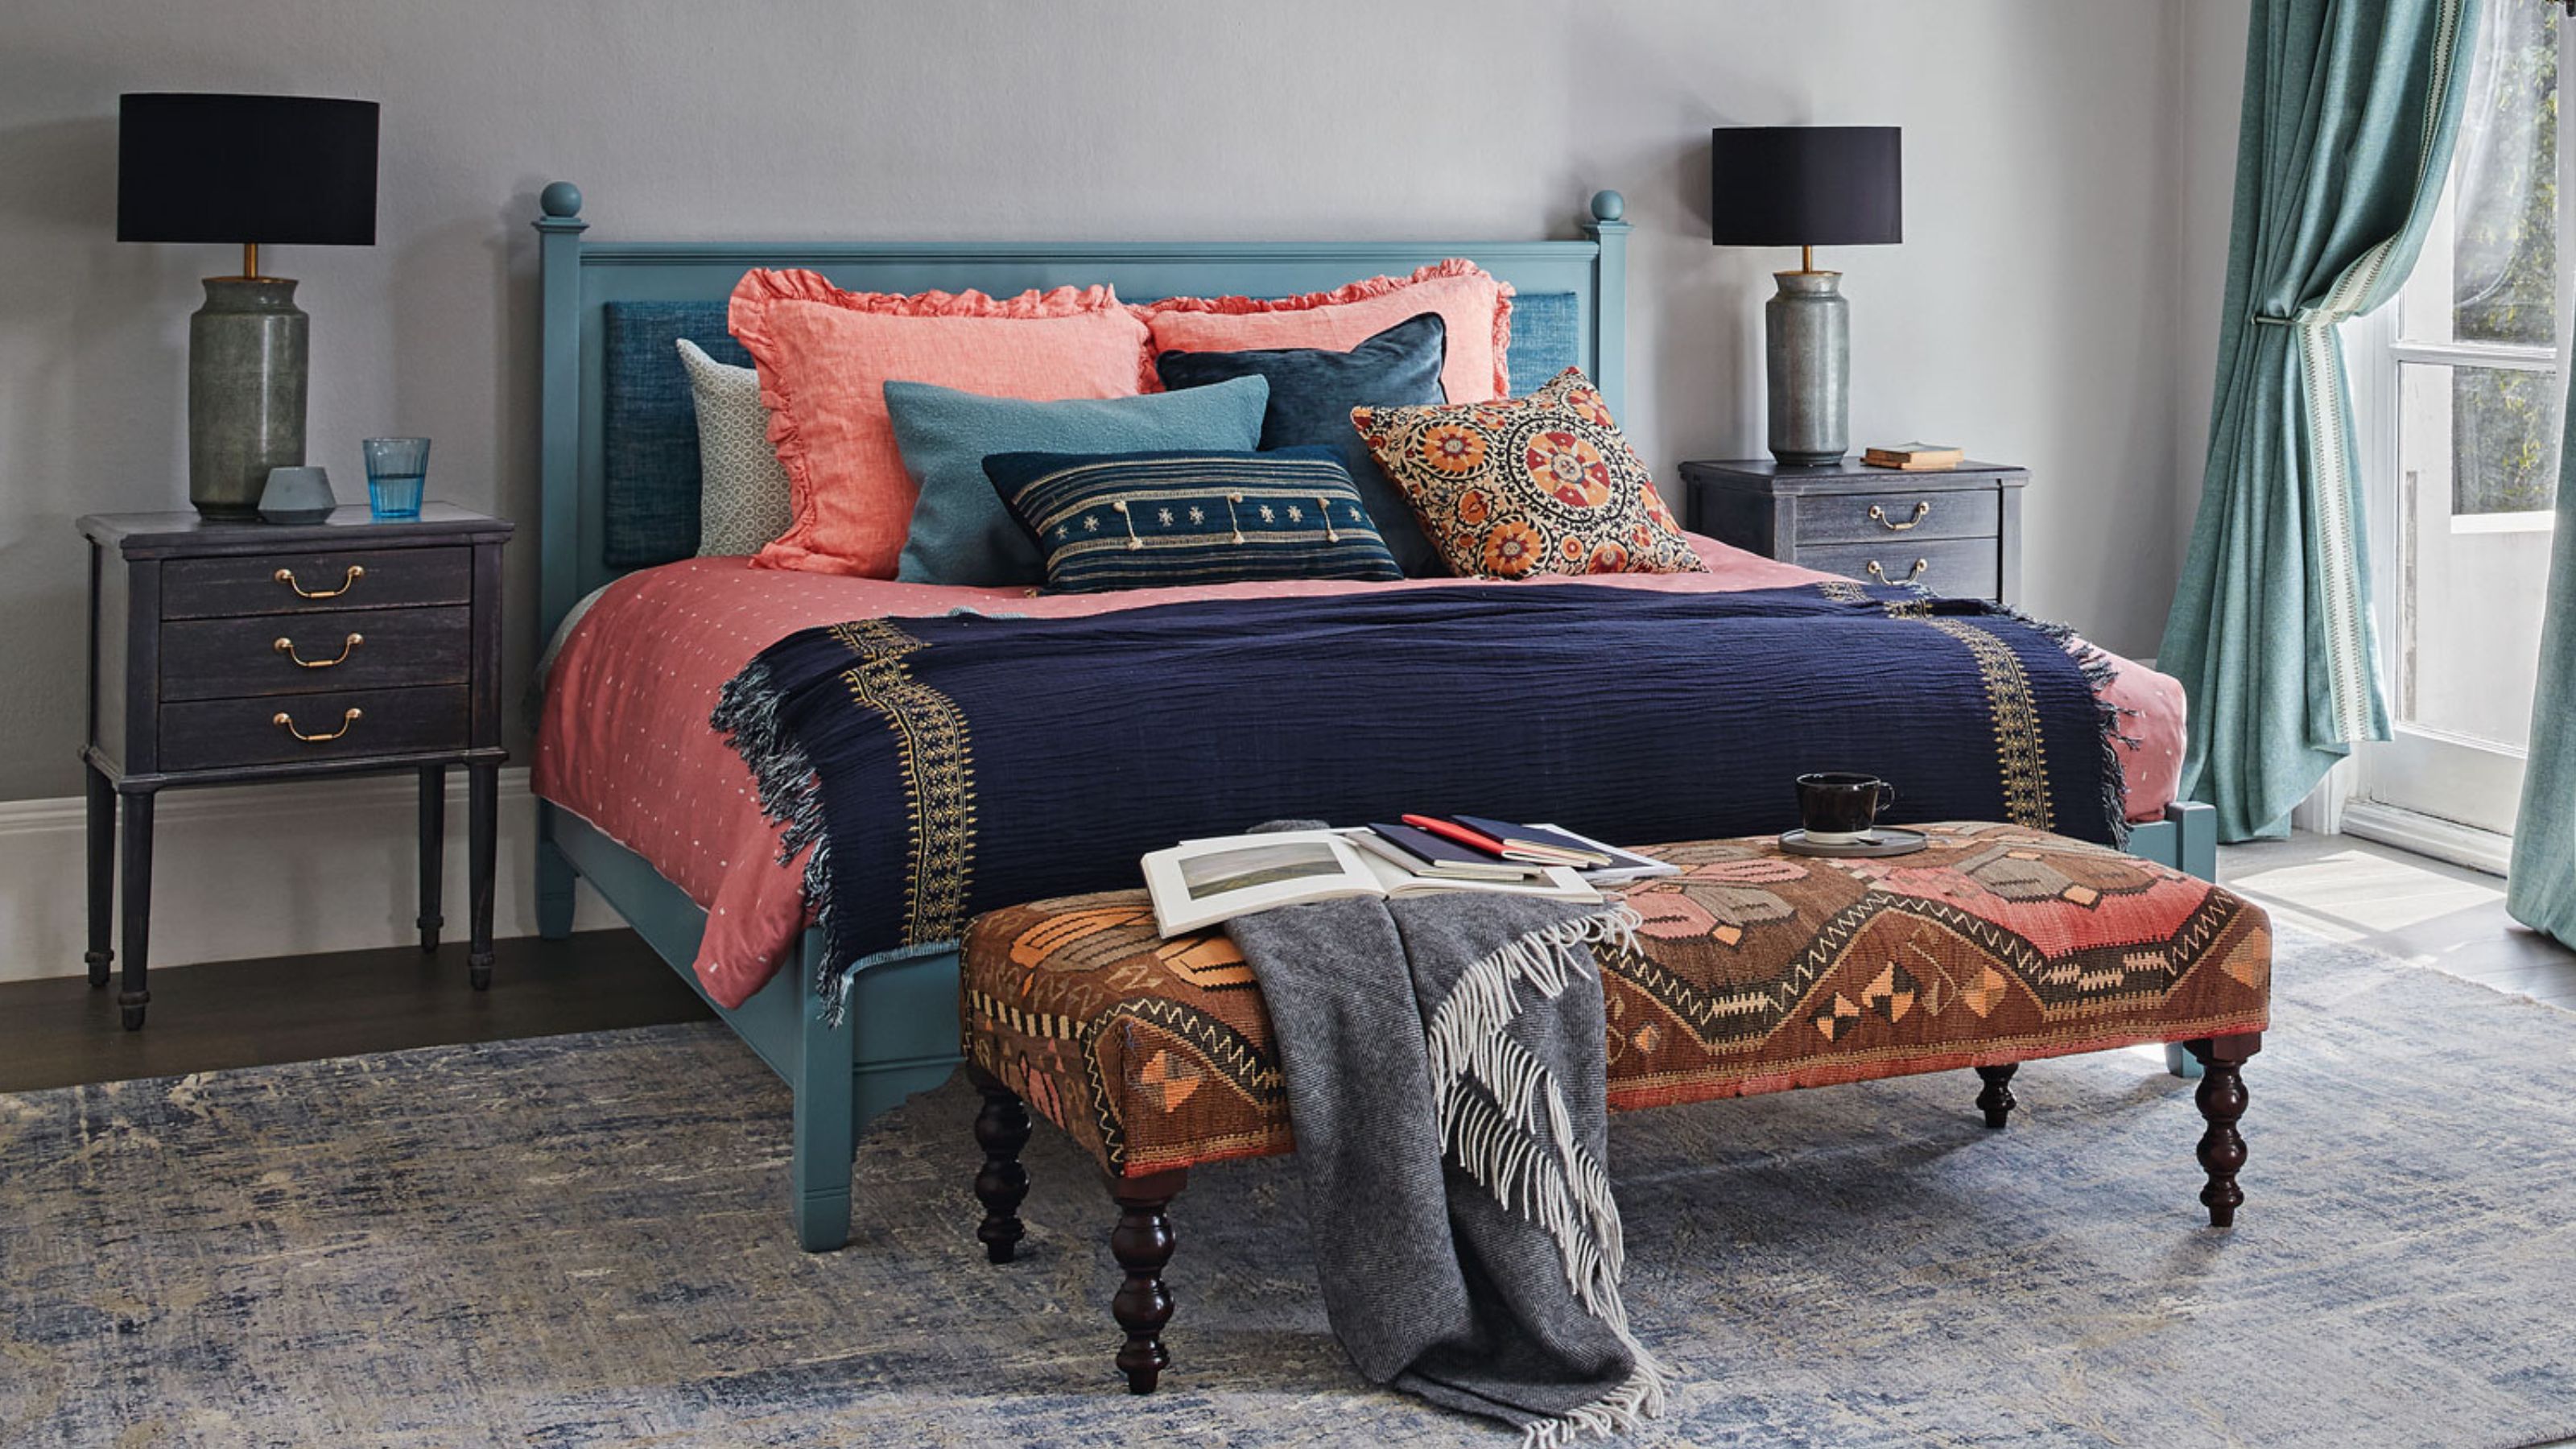 Bed pillow arrangements: style your bed according to size